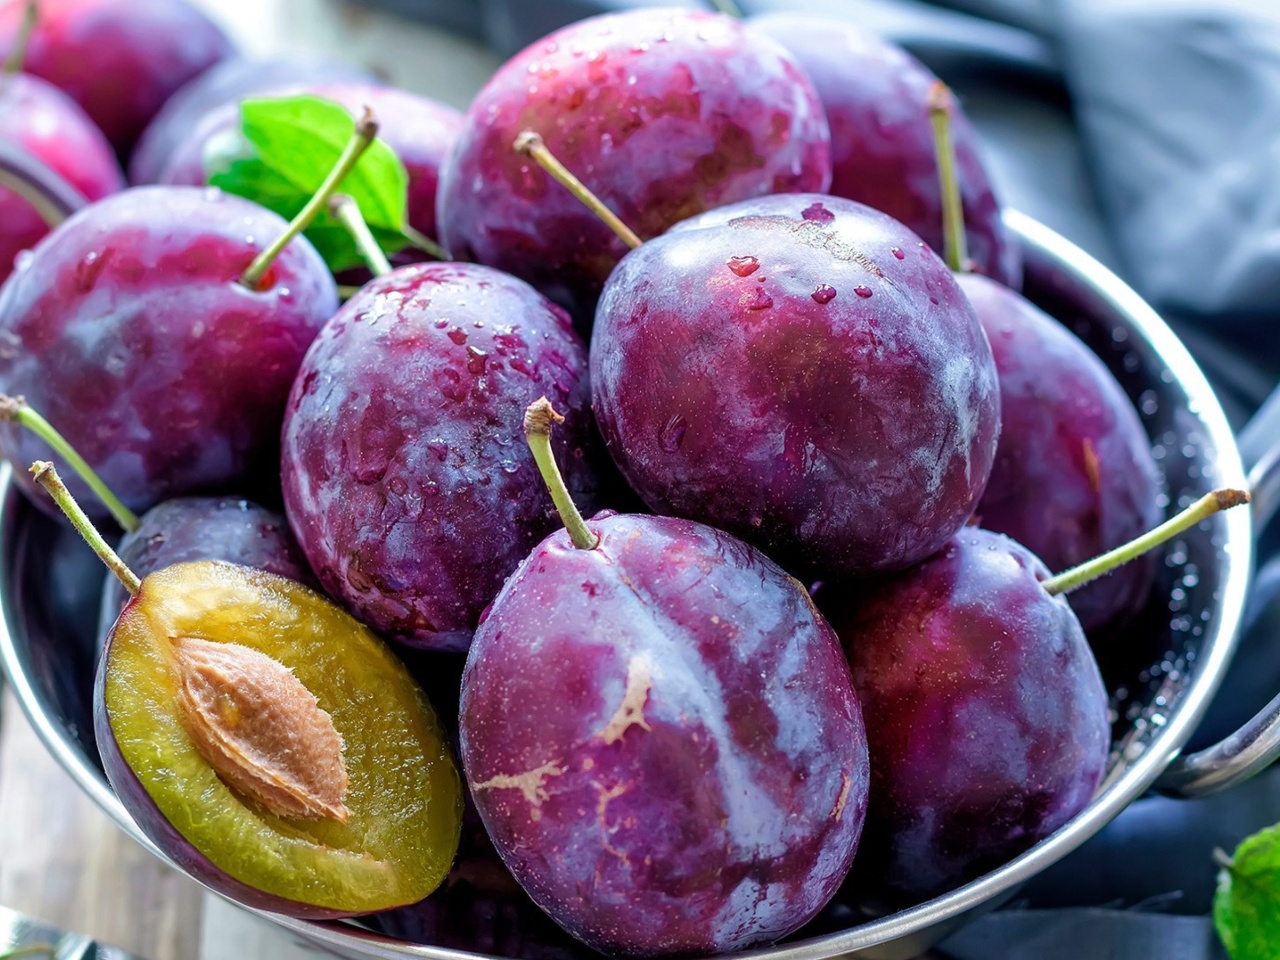 Plums with Vitamins wallpaper 1280x960